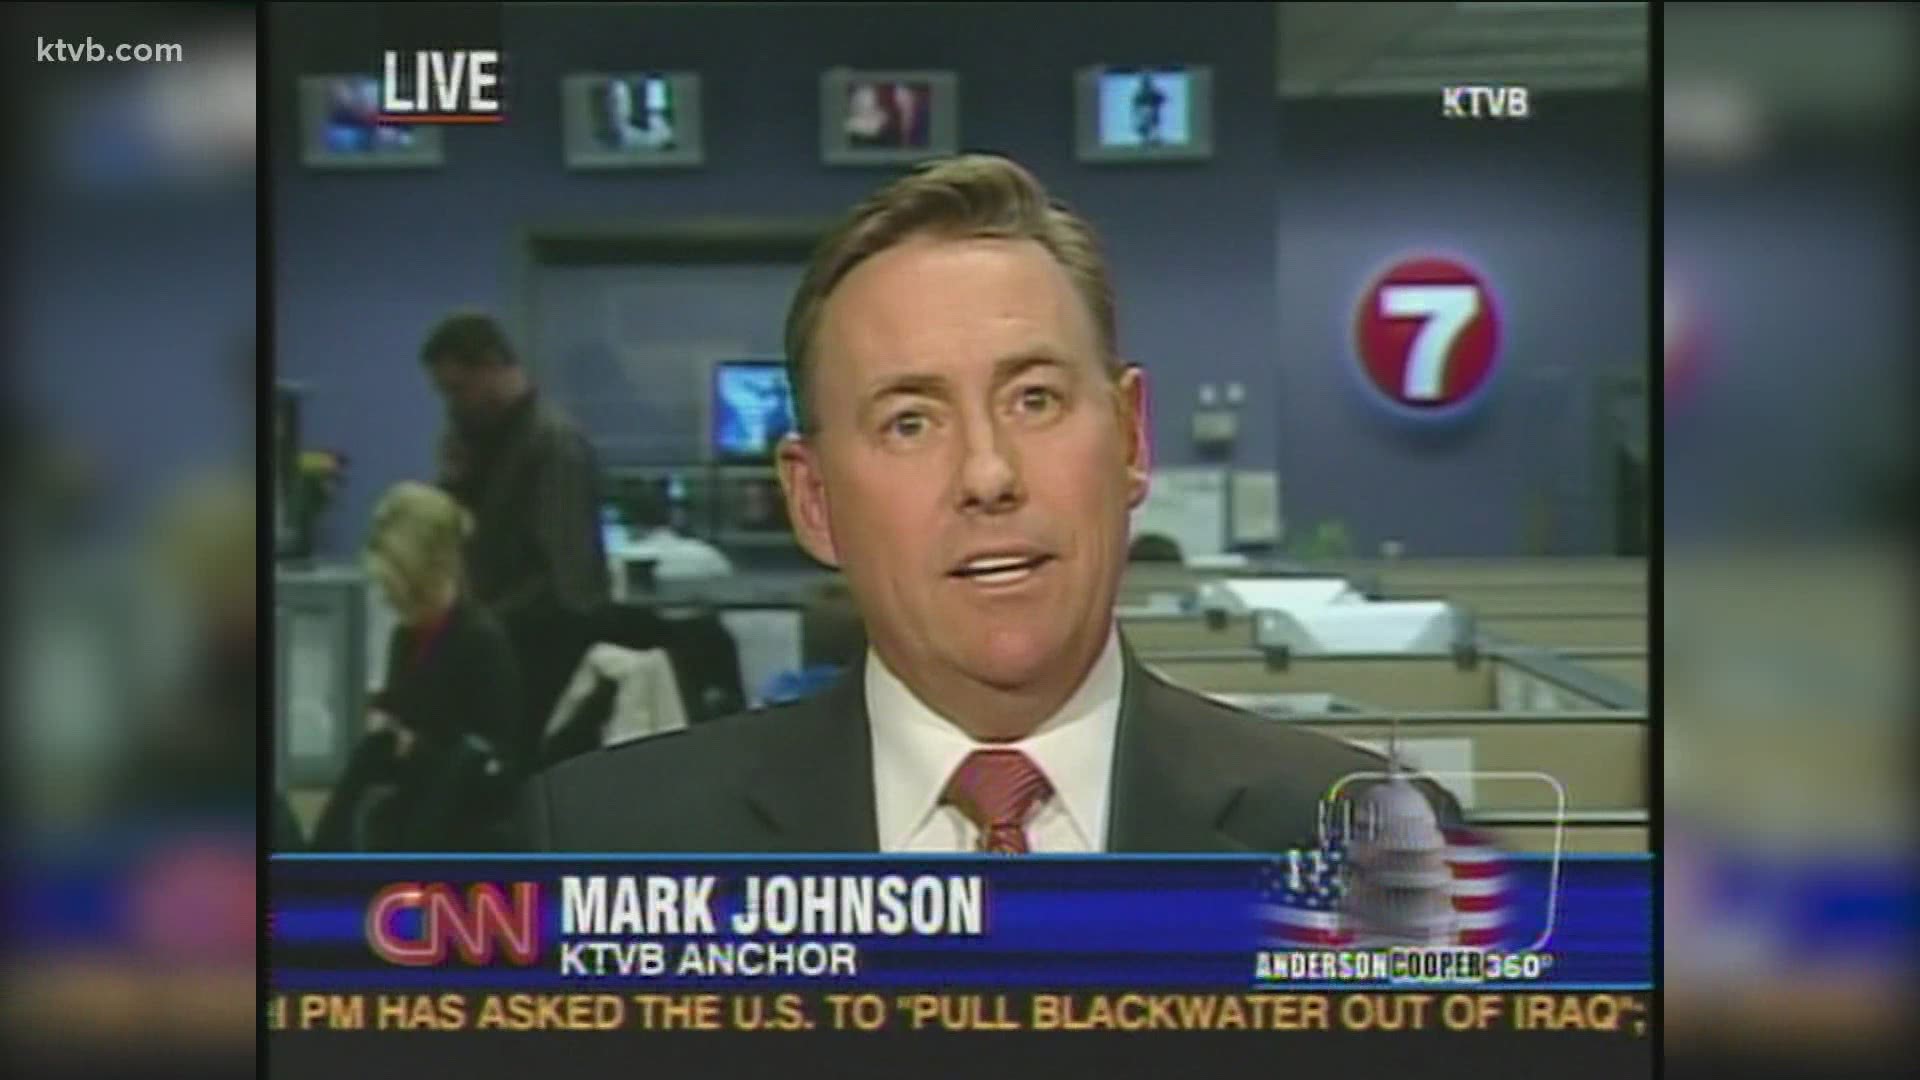 After three decades at Idaho’s leading news organization, KTVB News anchor and journalist Mark Johnson is retiring from television broadcasting.